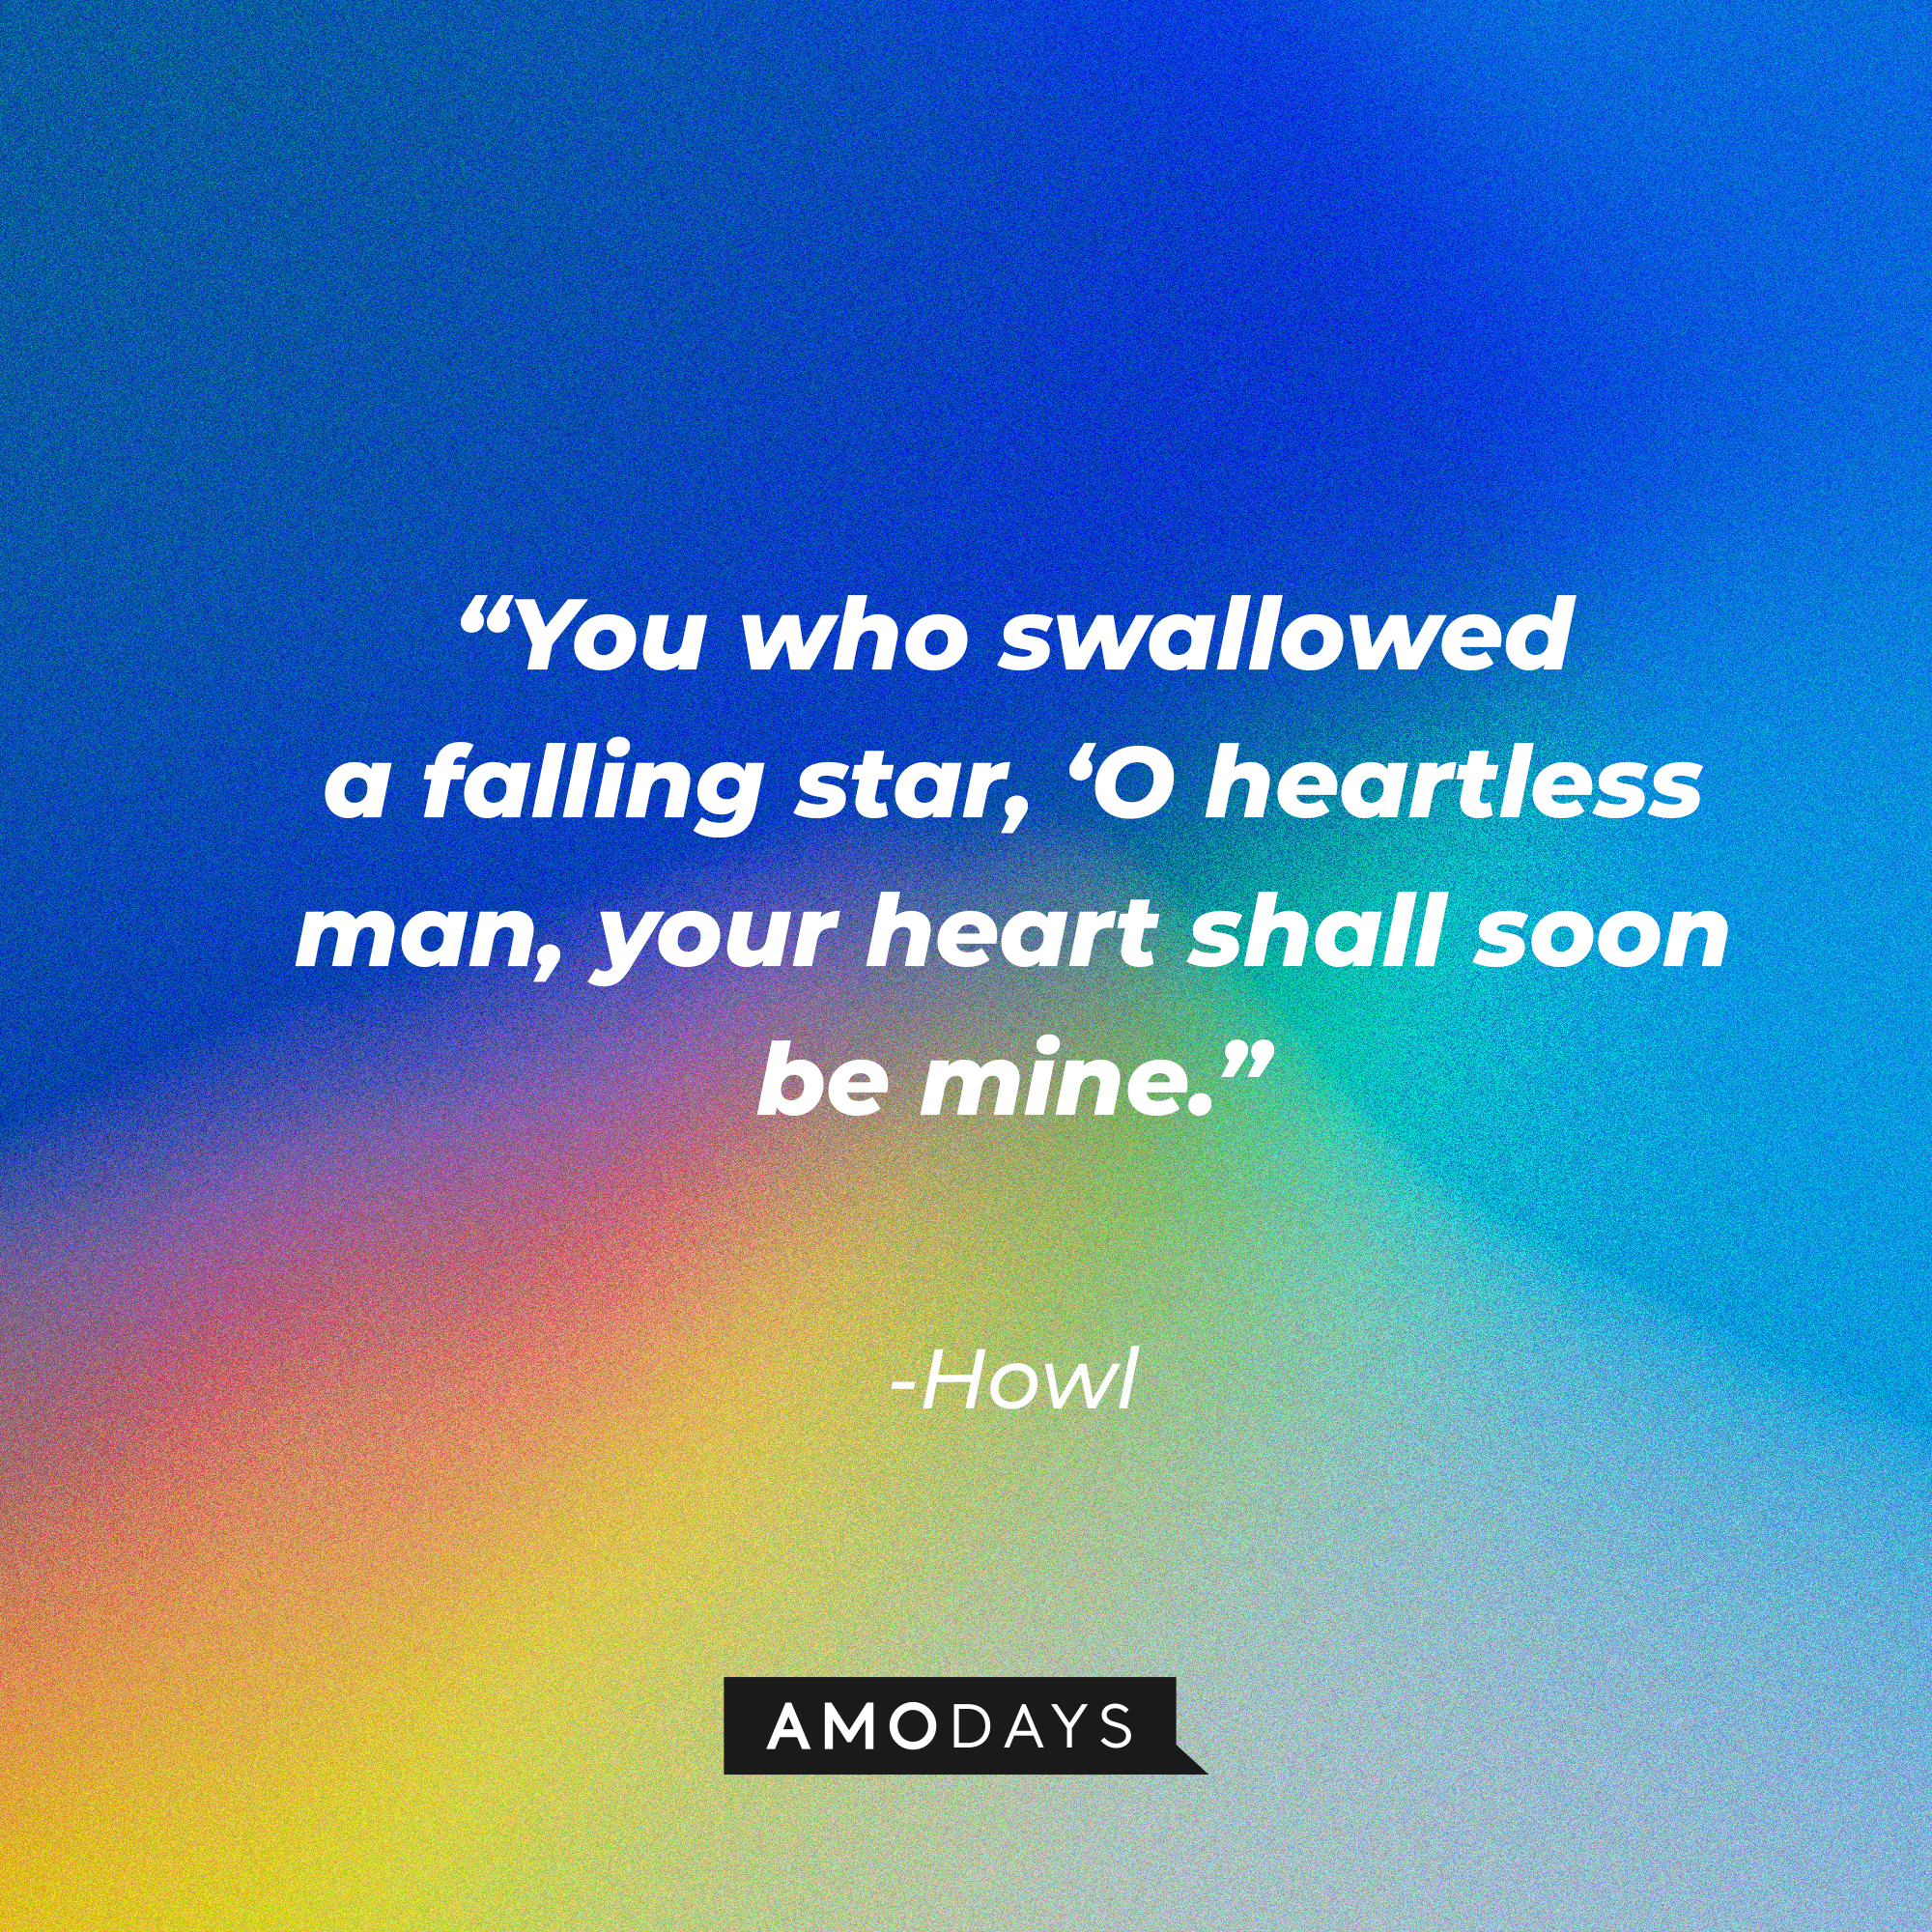 Howl’s quote: ”You who swallowed a falling star, ‘O heartless man, your heart shall soon be mine.” | Source: AmoDays